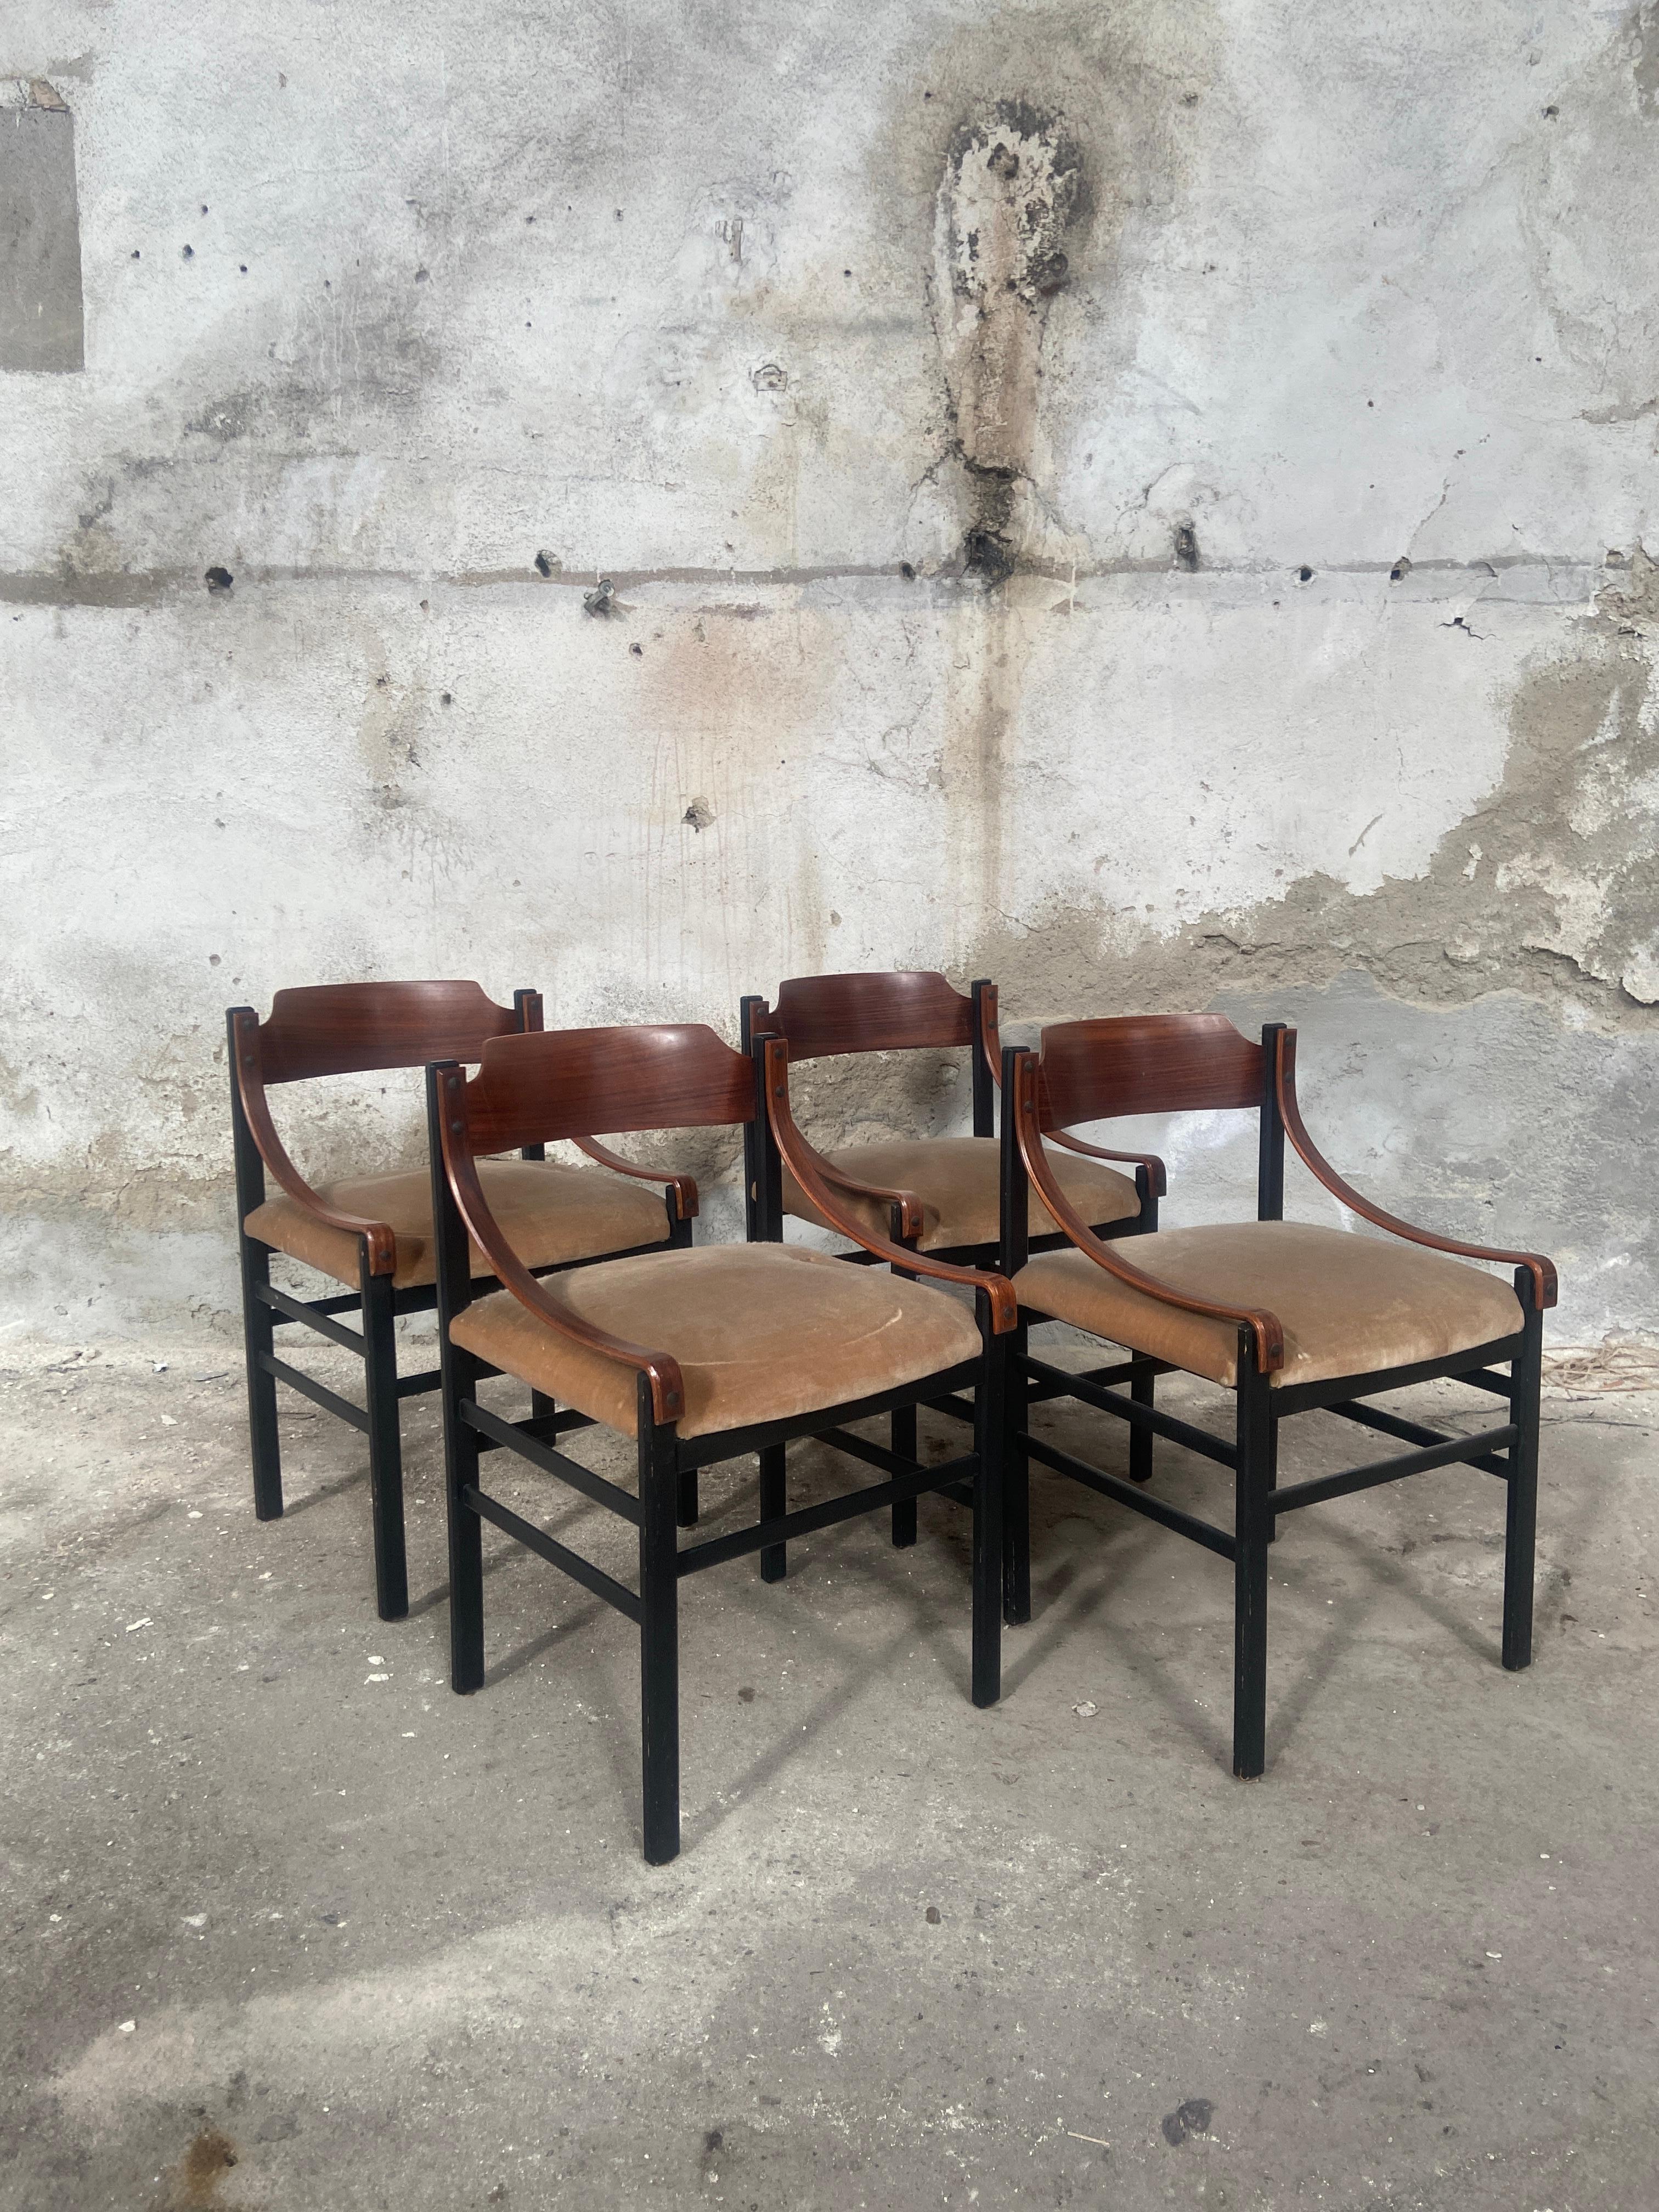 Mid-Century Modern Danish set of four dining room chairs with original velvet upholstery and wood structure.
The structure of the chairs is in really good vintage conditions. The seats are the original ones of the period and show traces of wear due